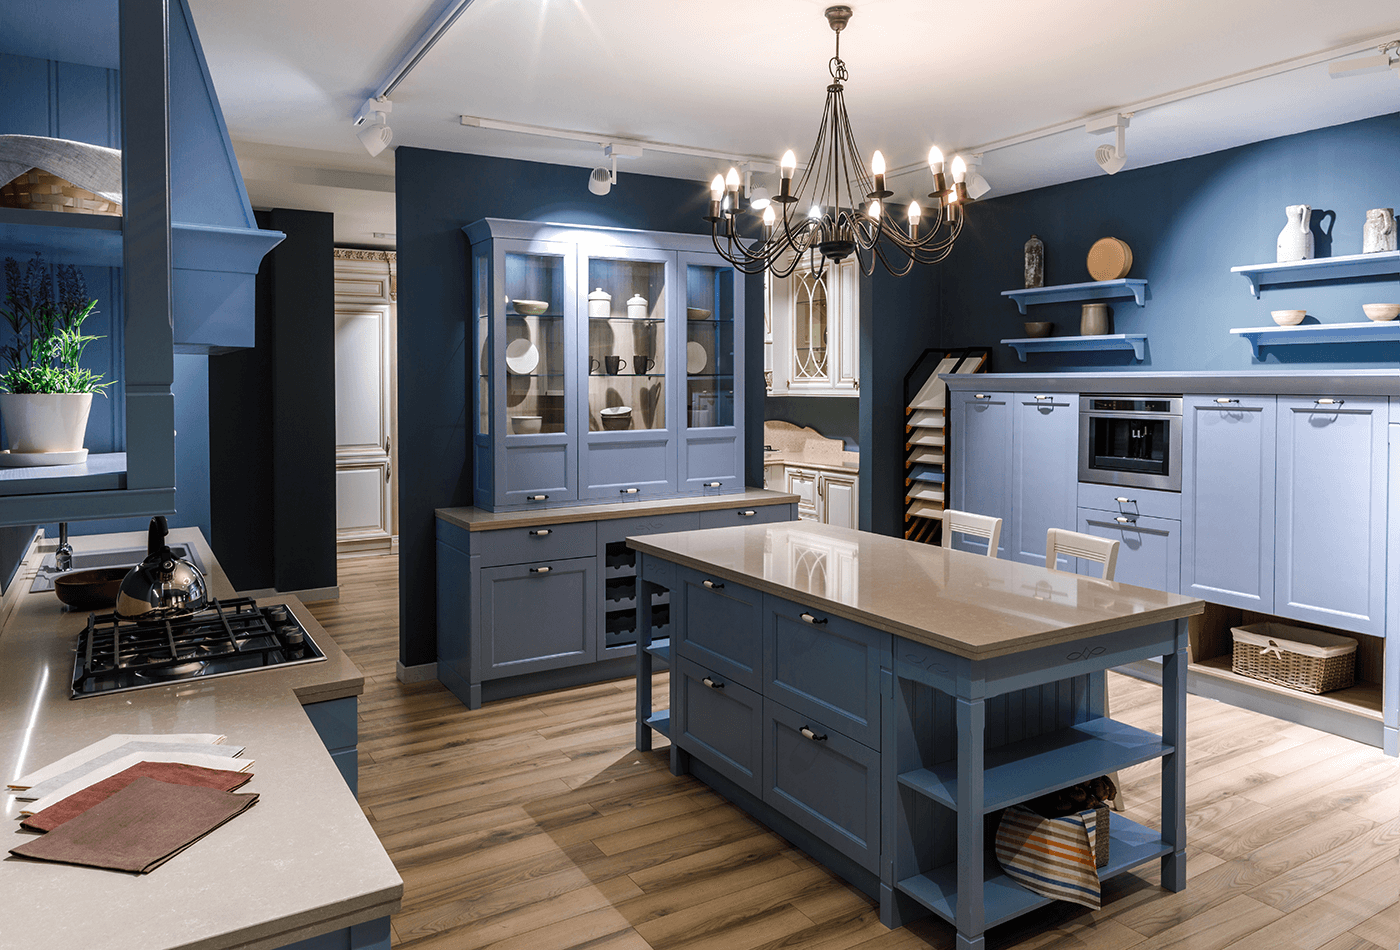 Modern Kitchen Design, Choosing Blue Colors for Kitchen Cabinets, Walls and  Decor